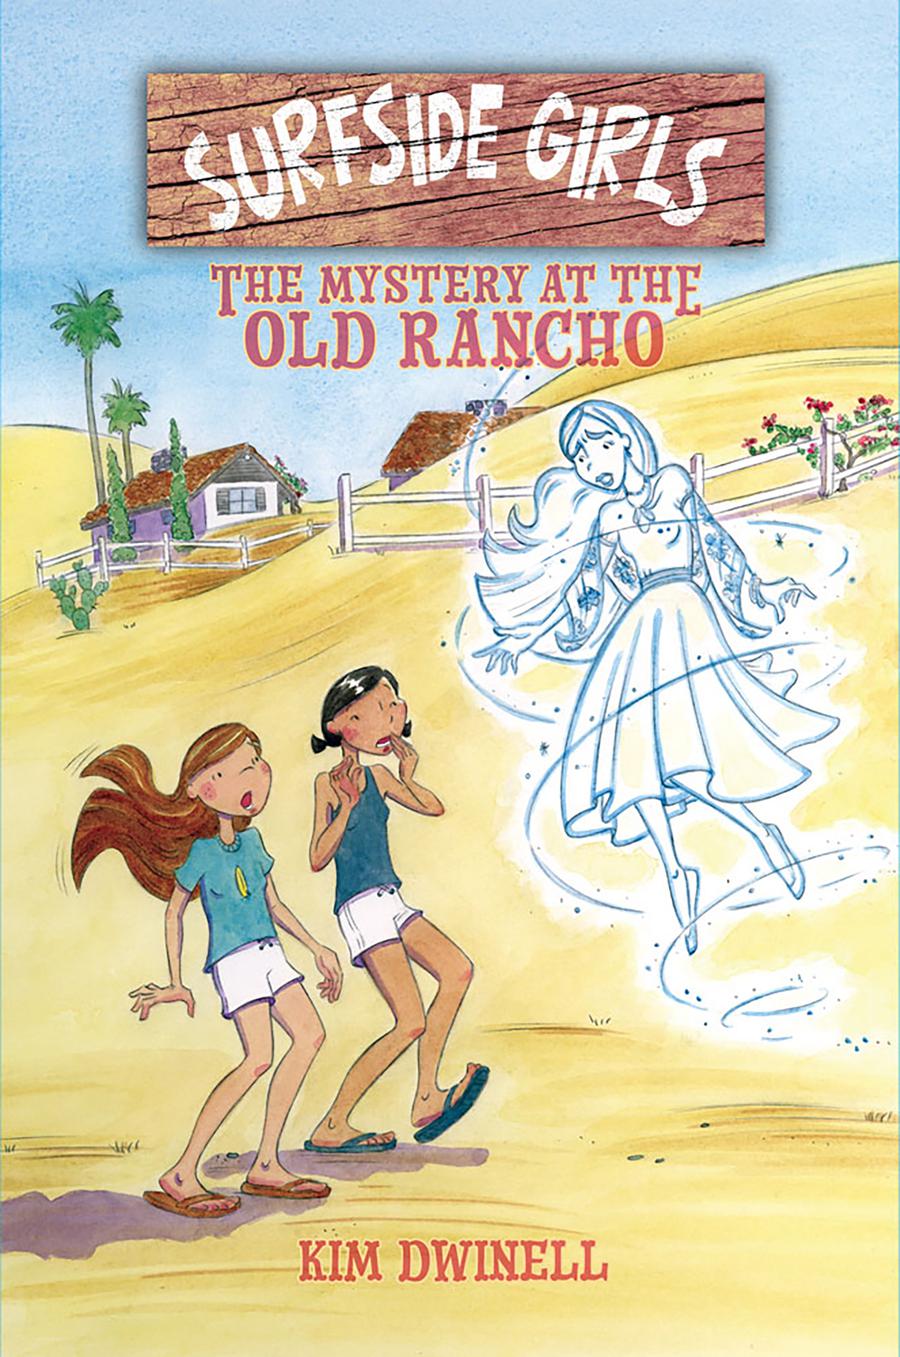 Surfside Girls Vol 2 Mystery At The Old Rancho GN